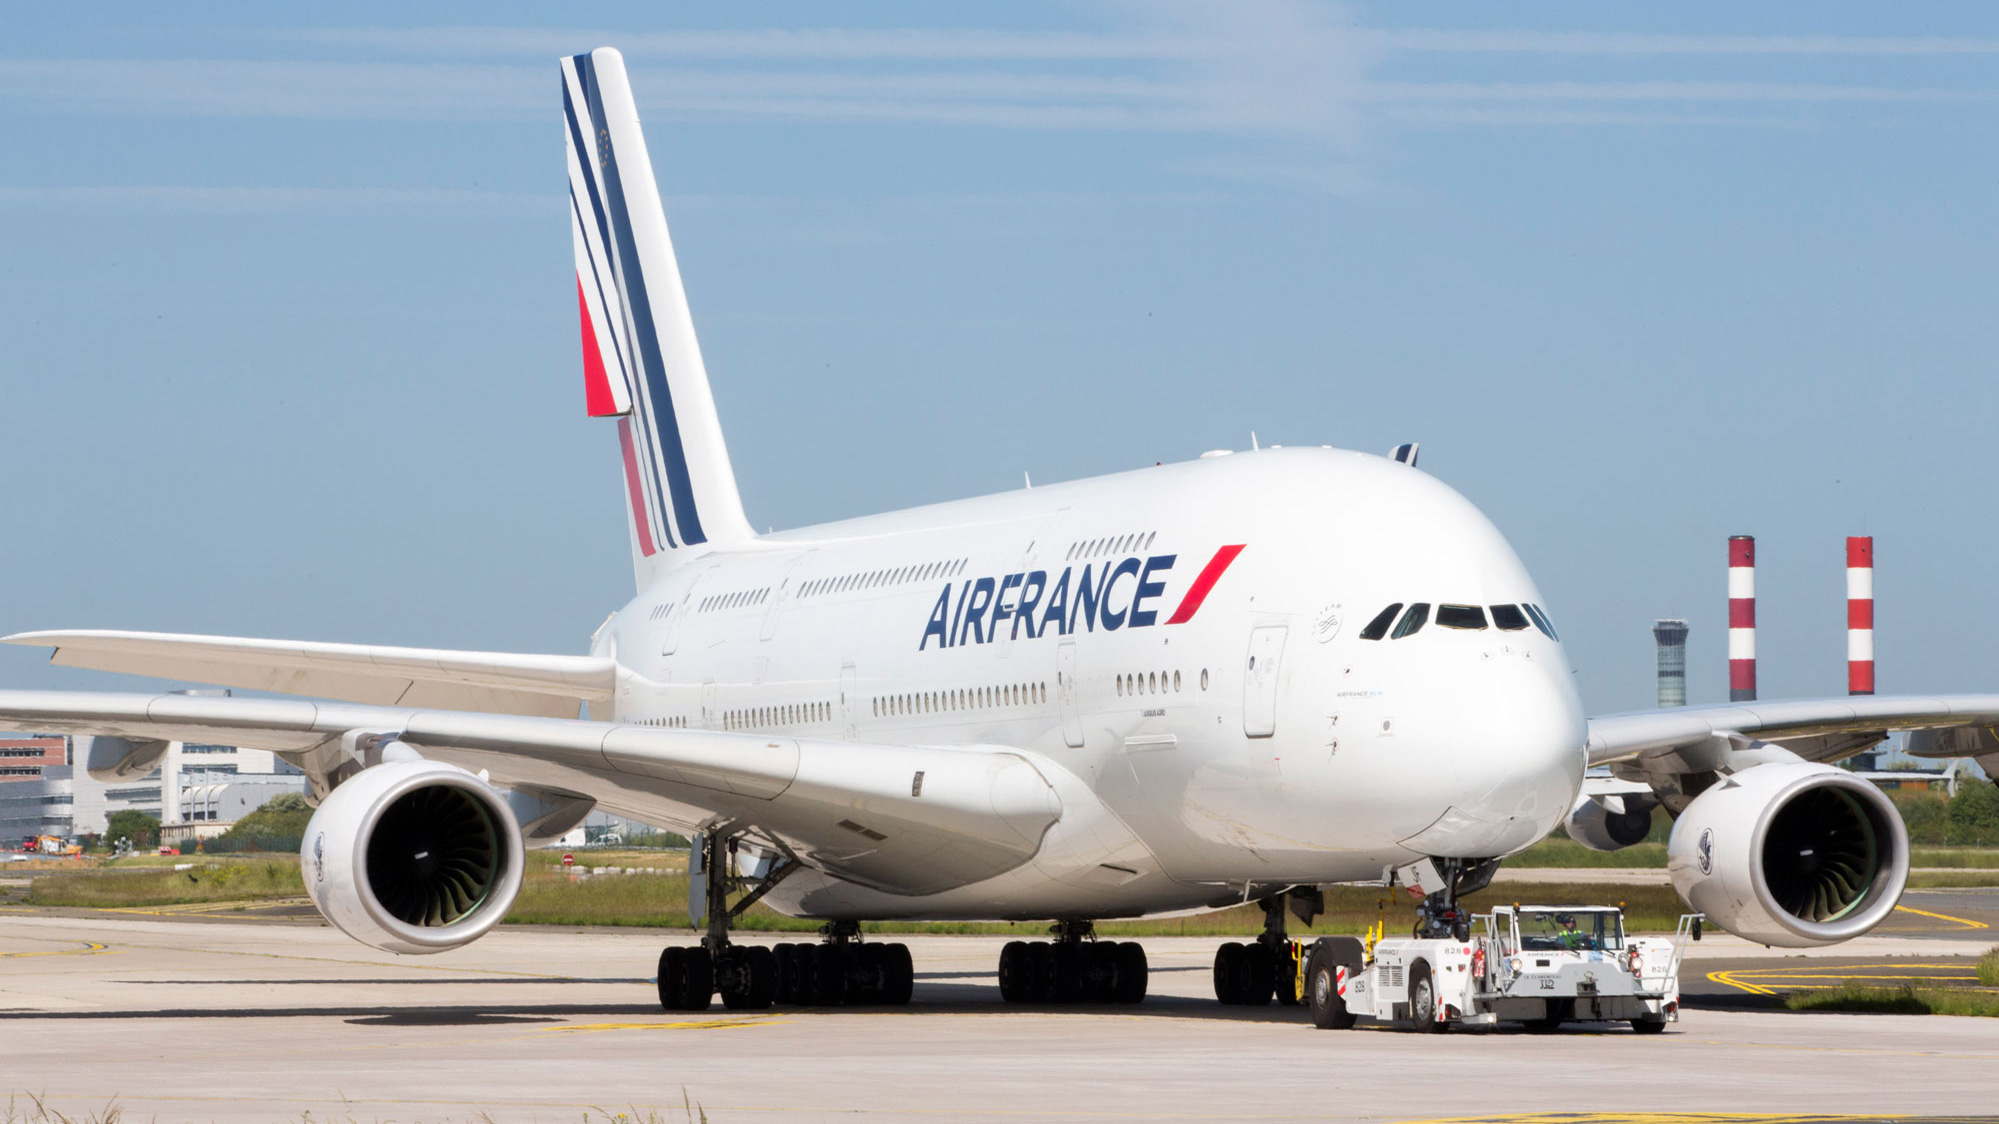 air-france-is-certified-as-a-4-star-airline-skytrax